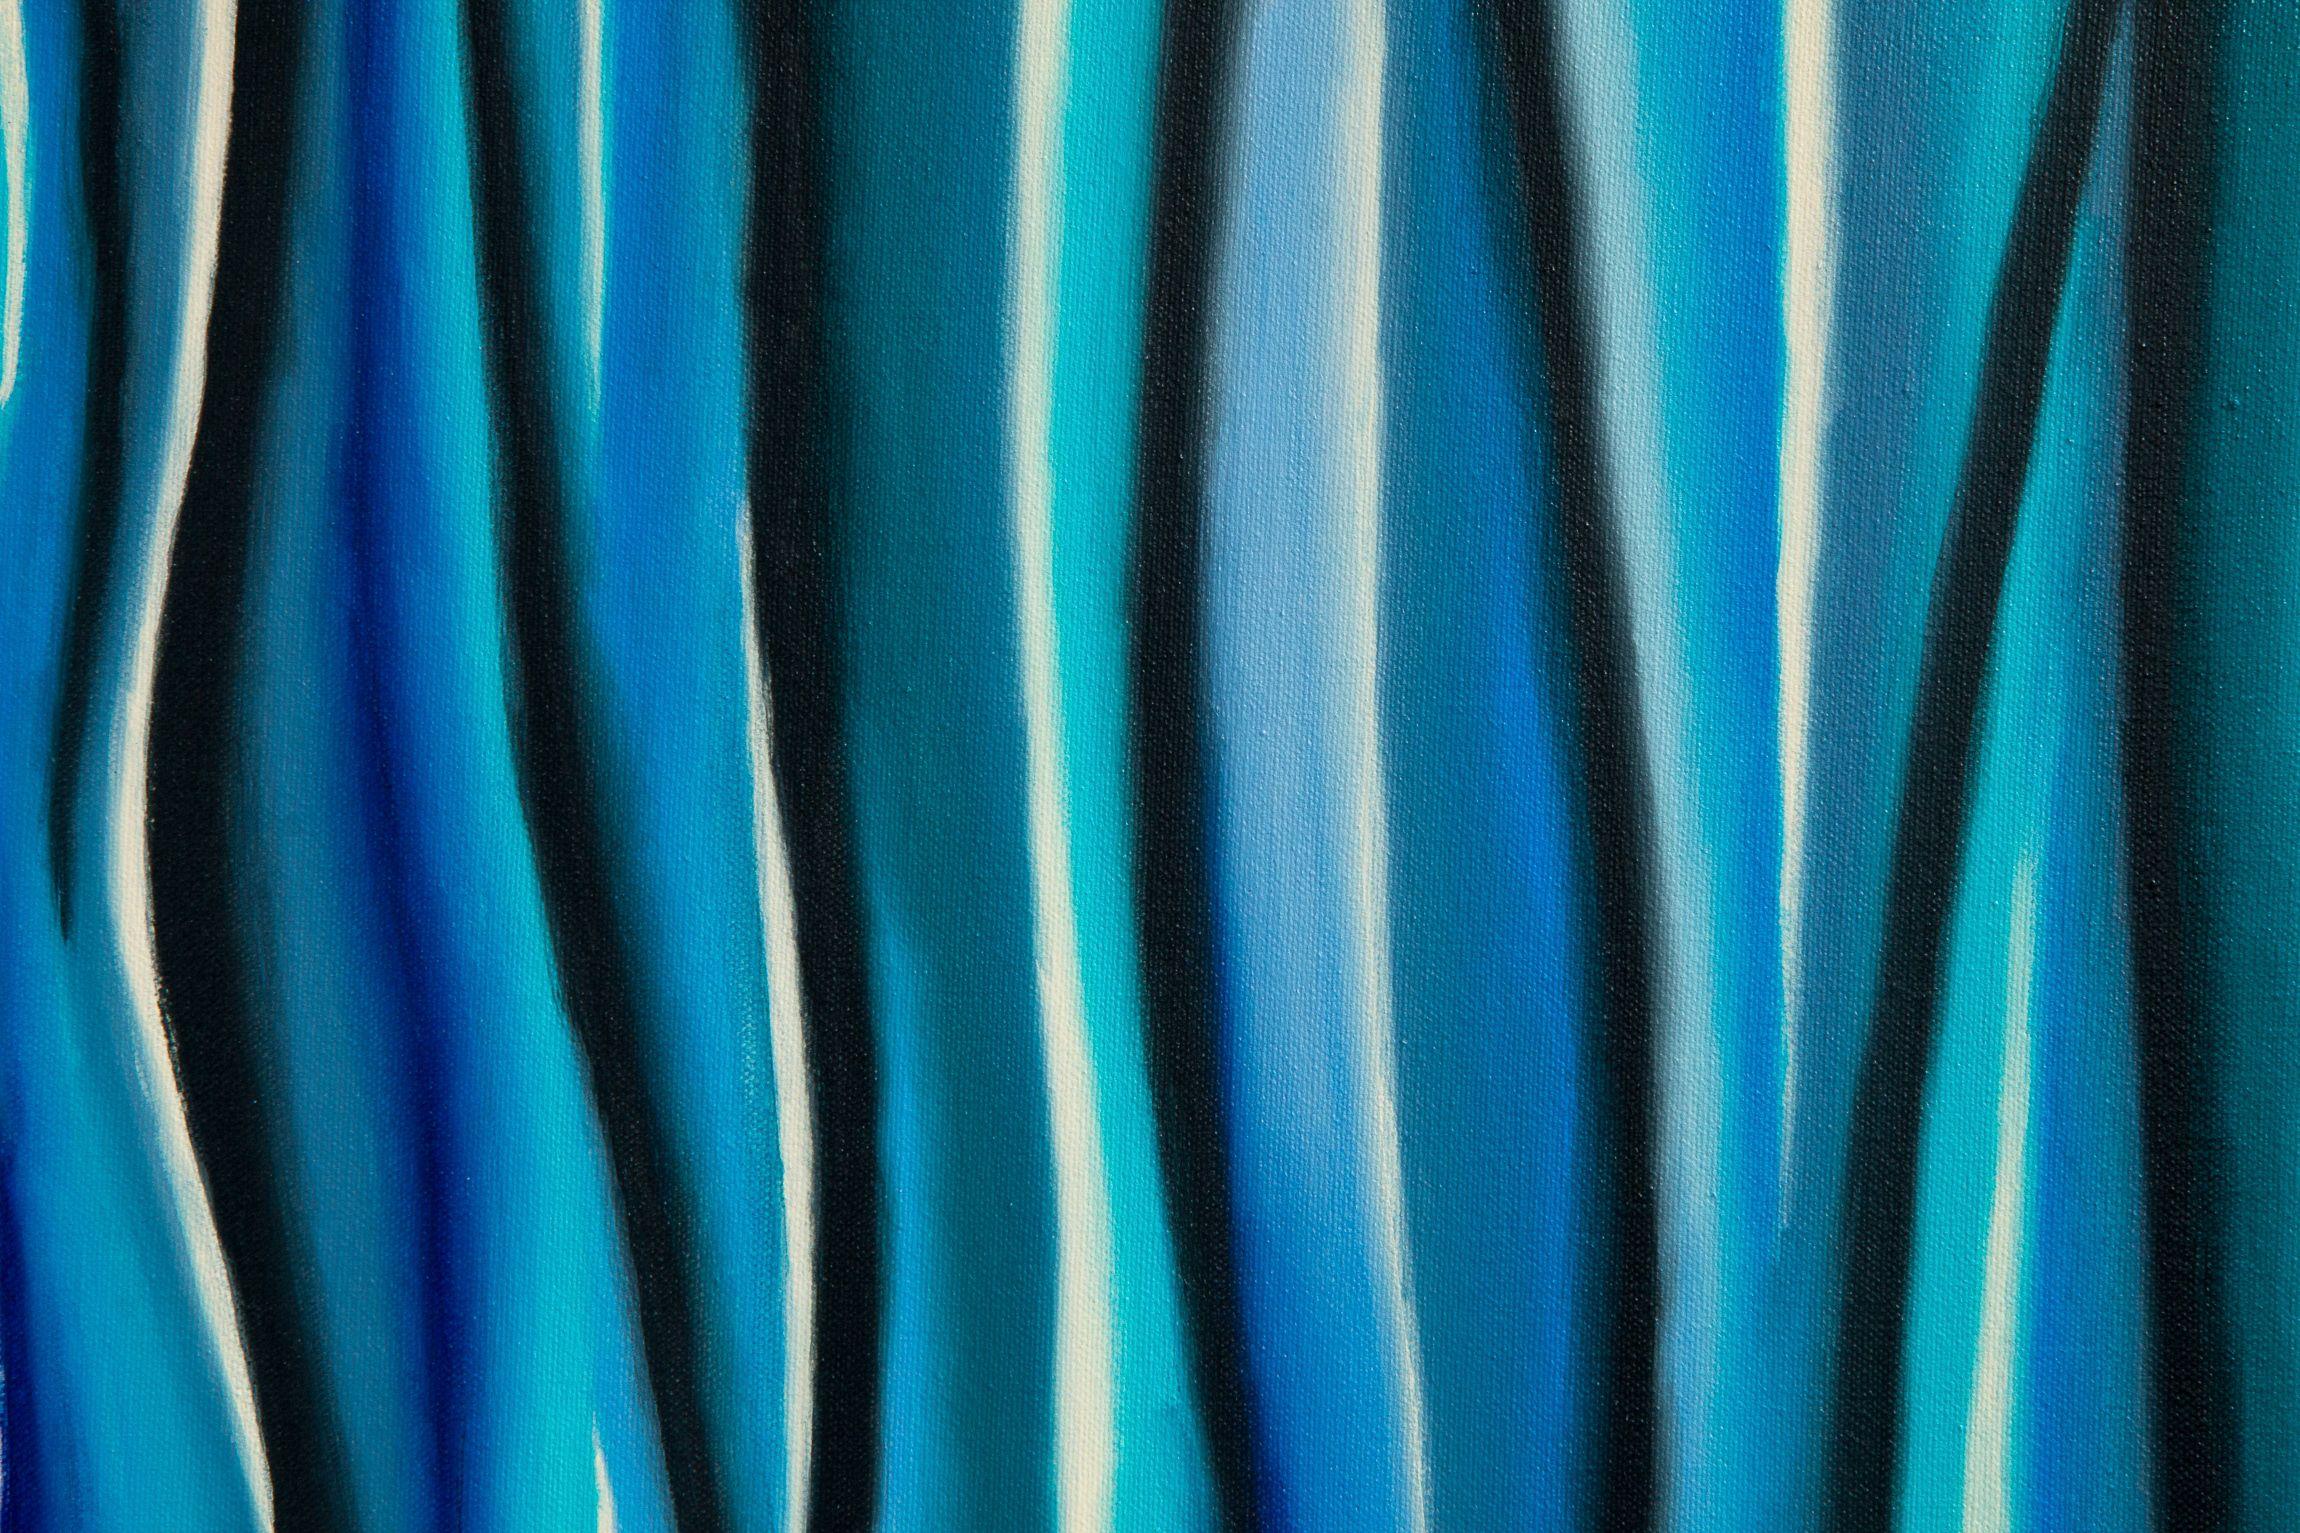 Synergy, Painting, Acrylic on Canvas - Blue Abstract Painting by Stefan Fierros